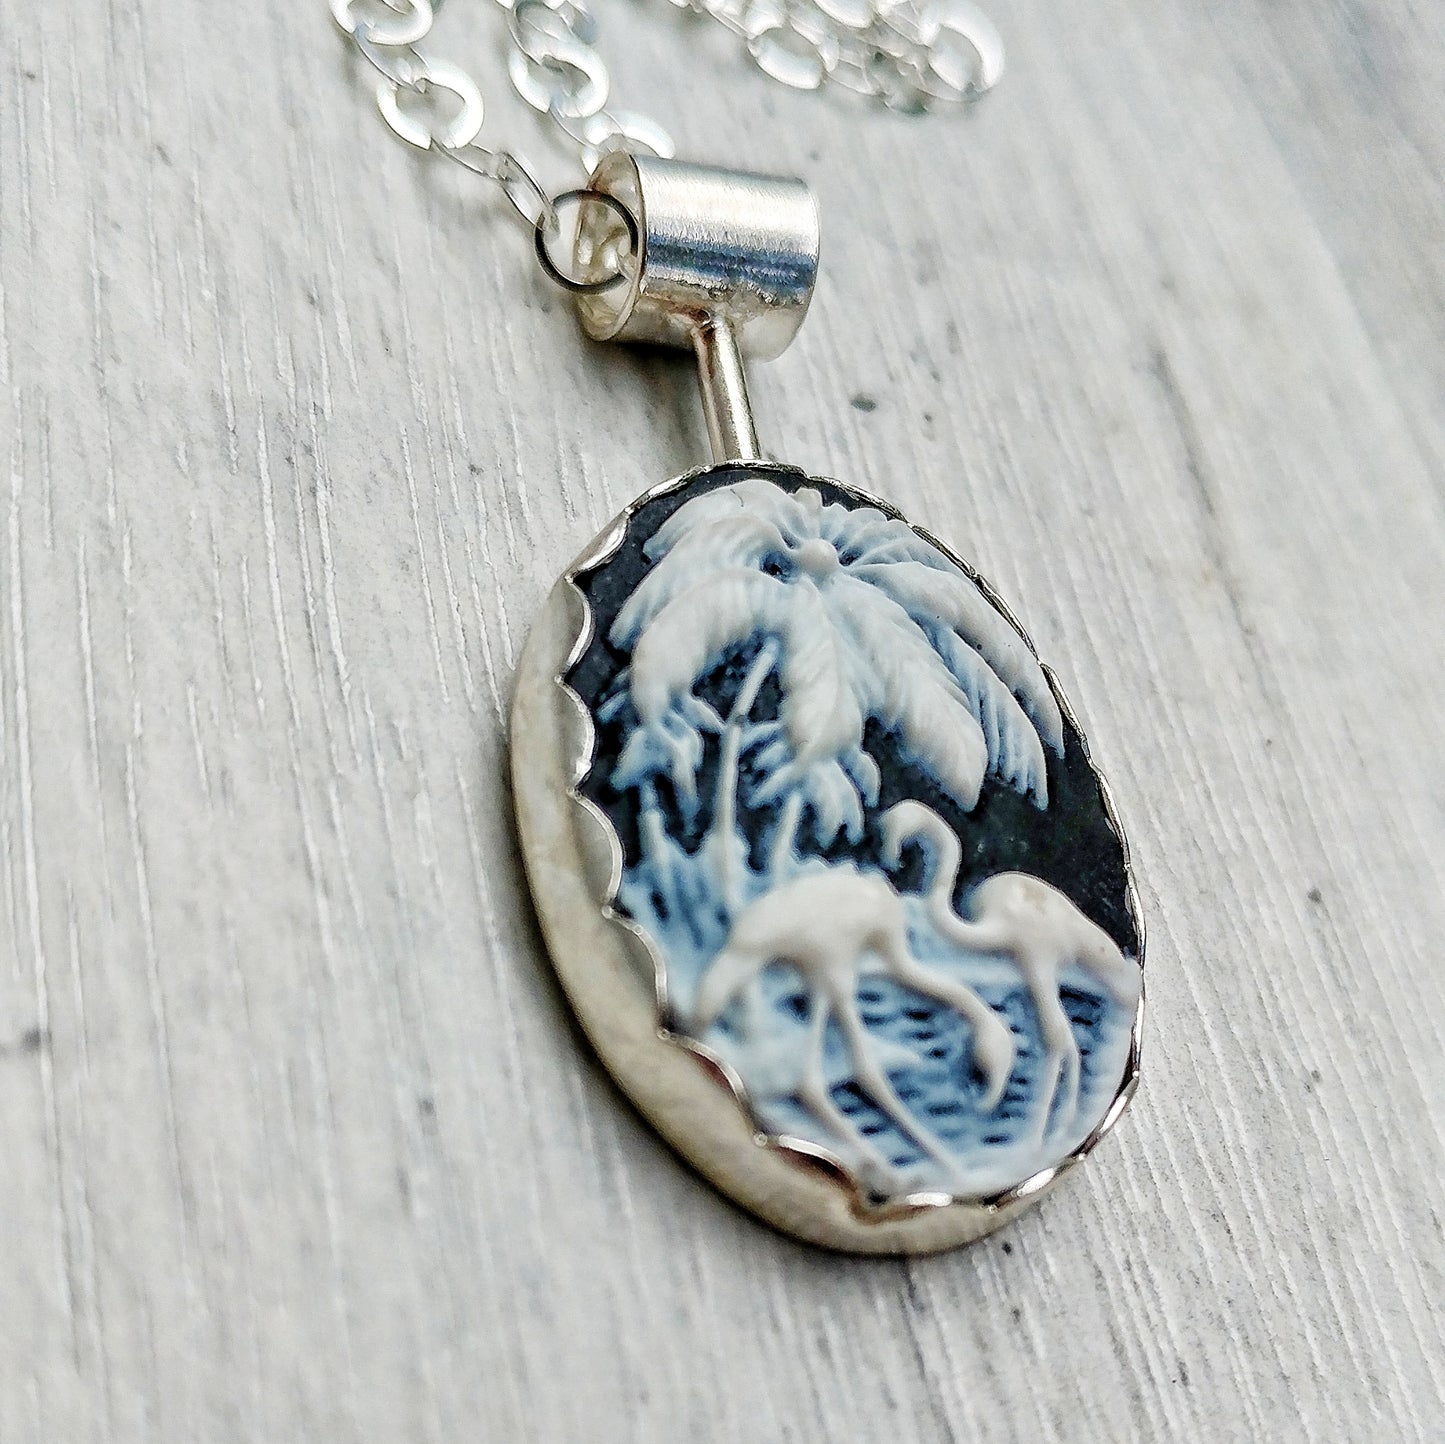 Flamingo cameo necklace set in sterling silver